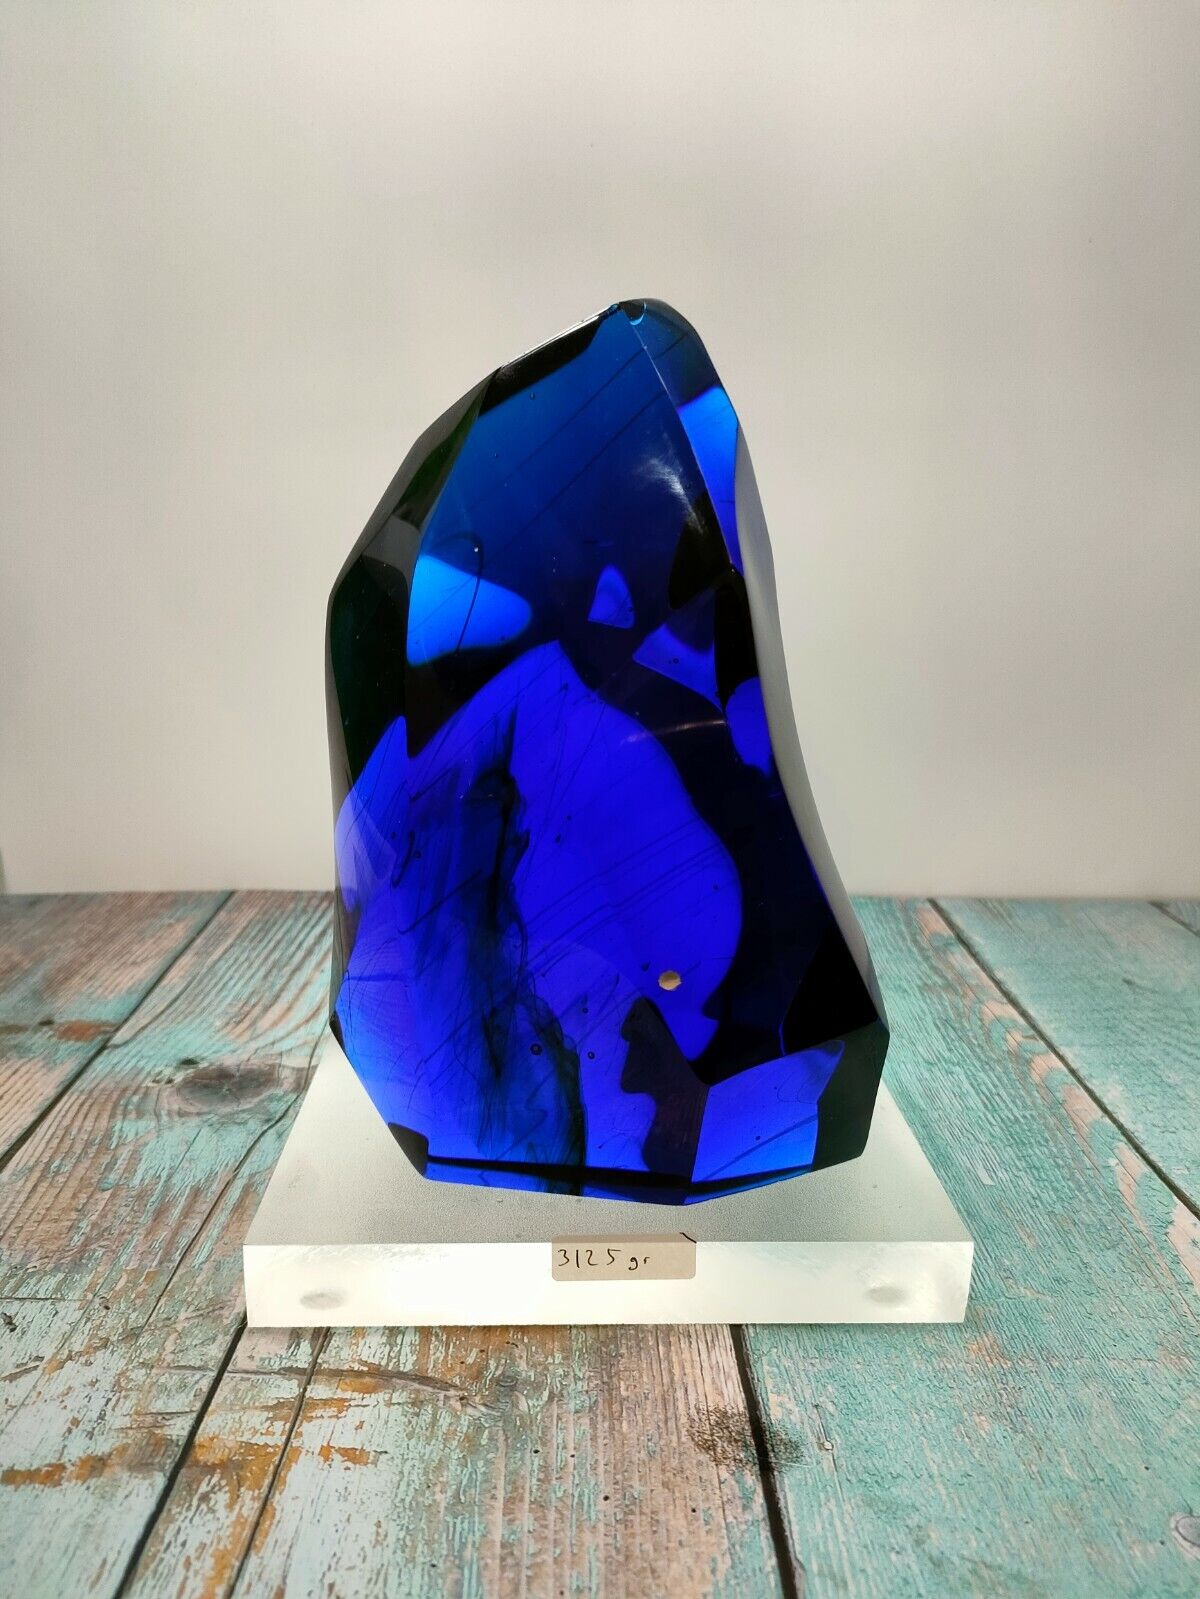 Andara Crystal Cutting Ocean Blue Motive 3125gr with base for Decoration